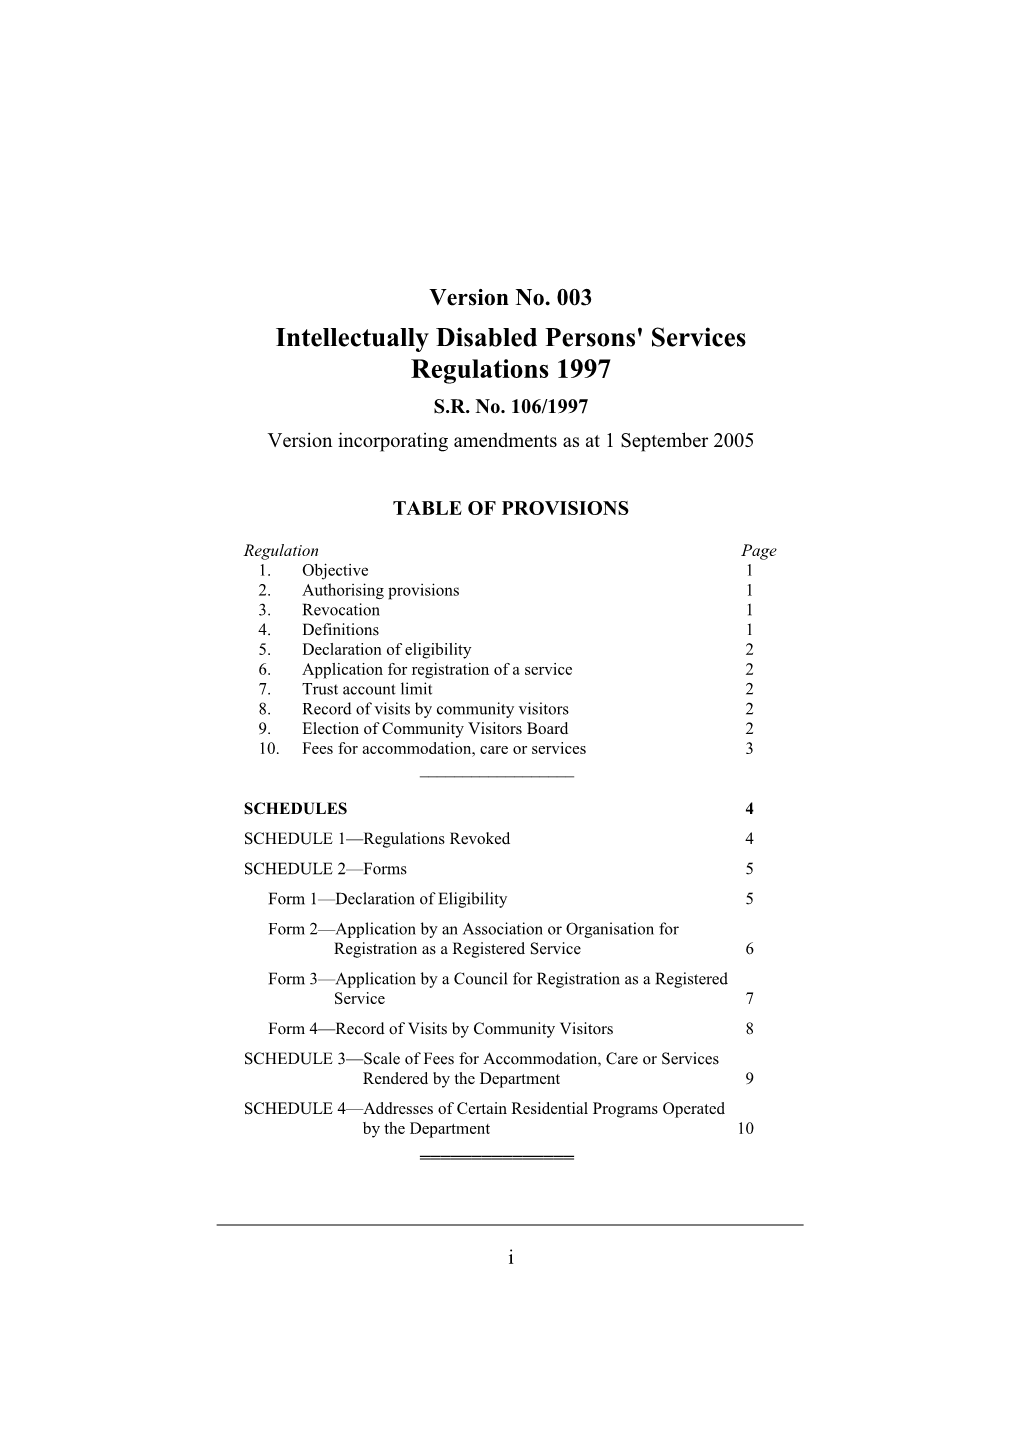 Intellectually Disabled Persons' Services Regulations 1997